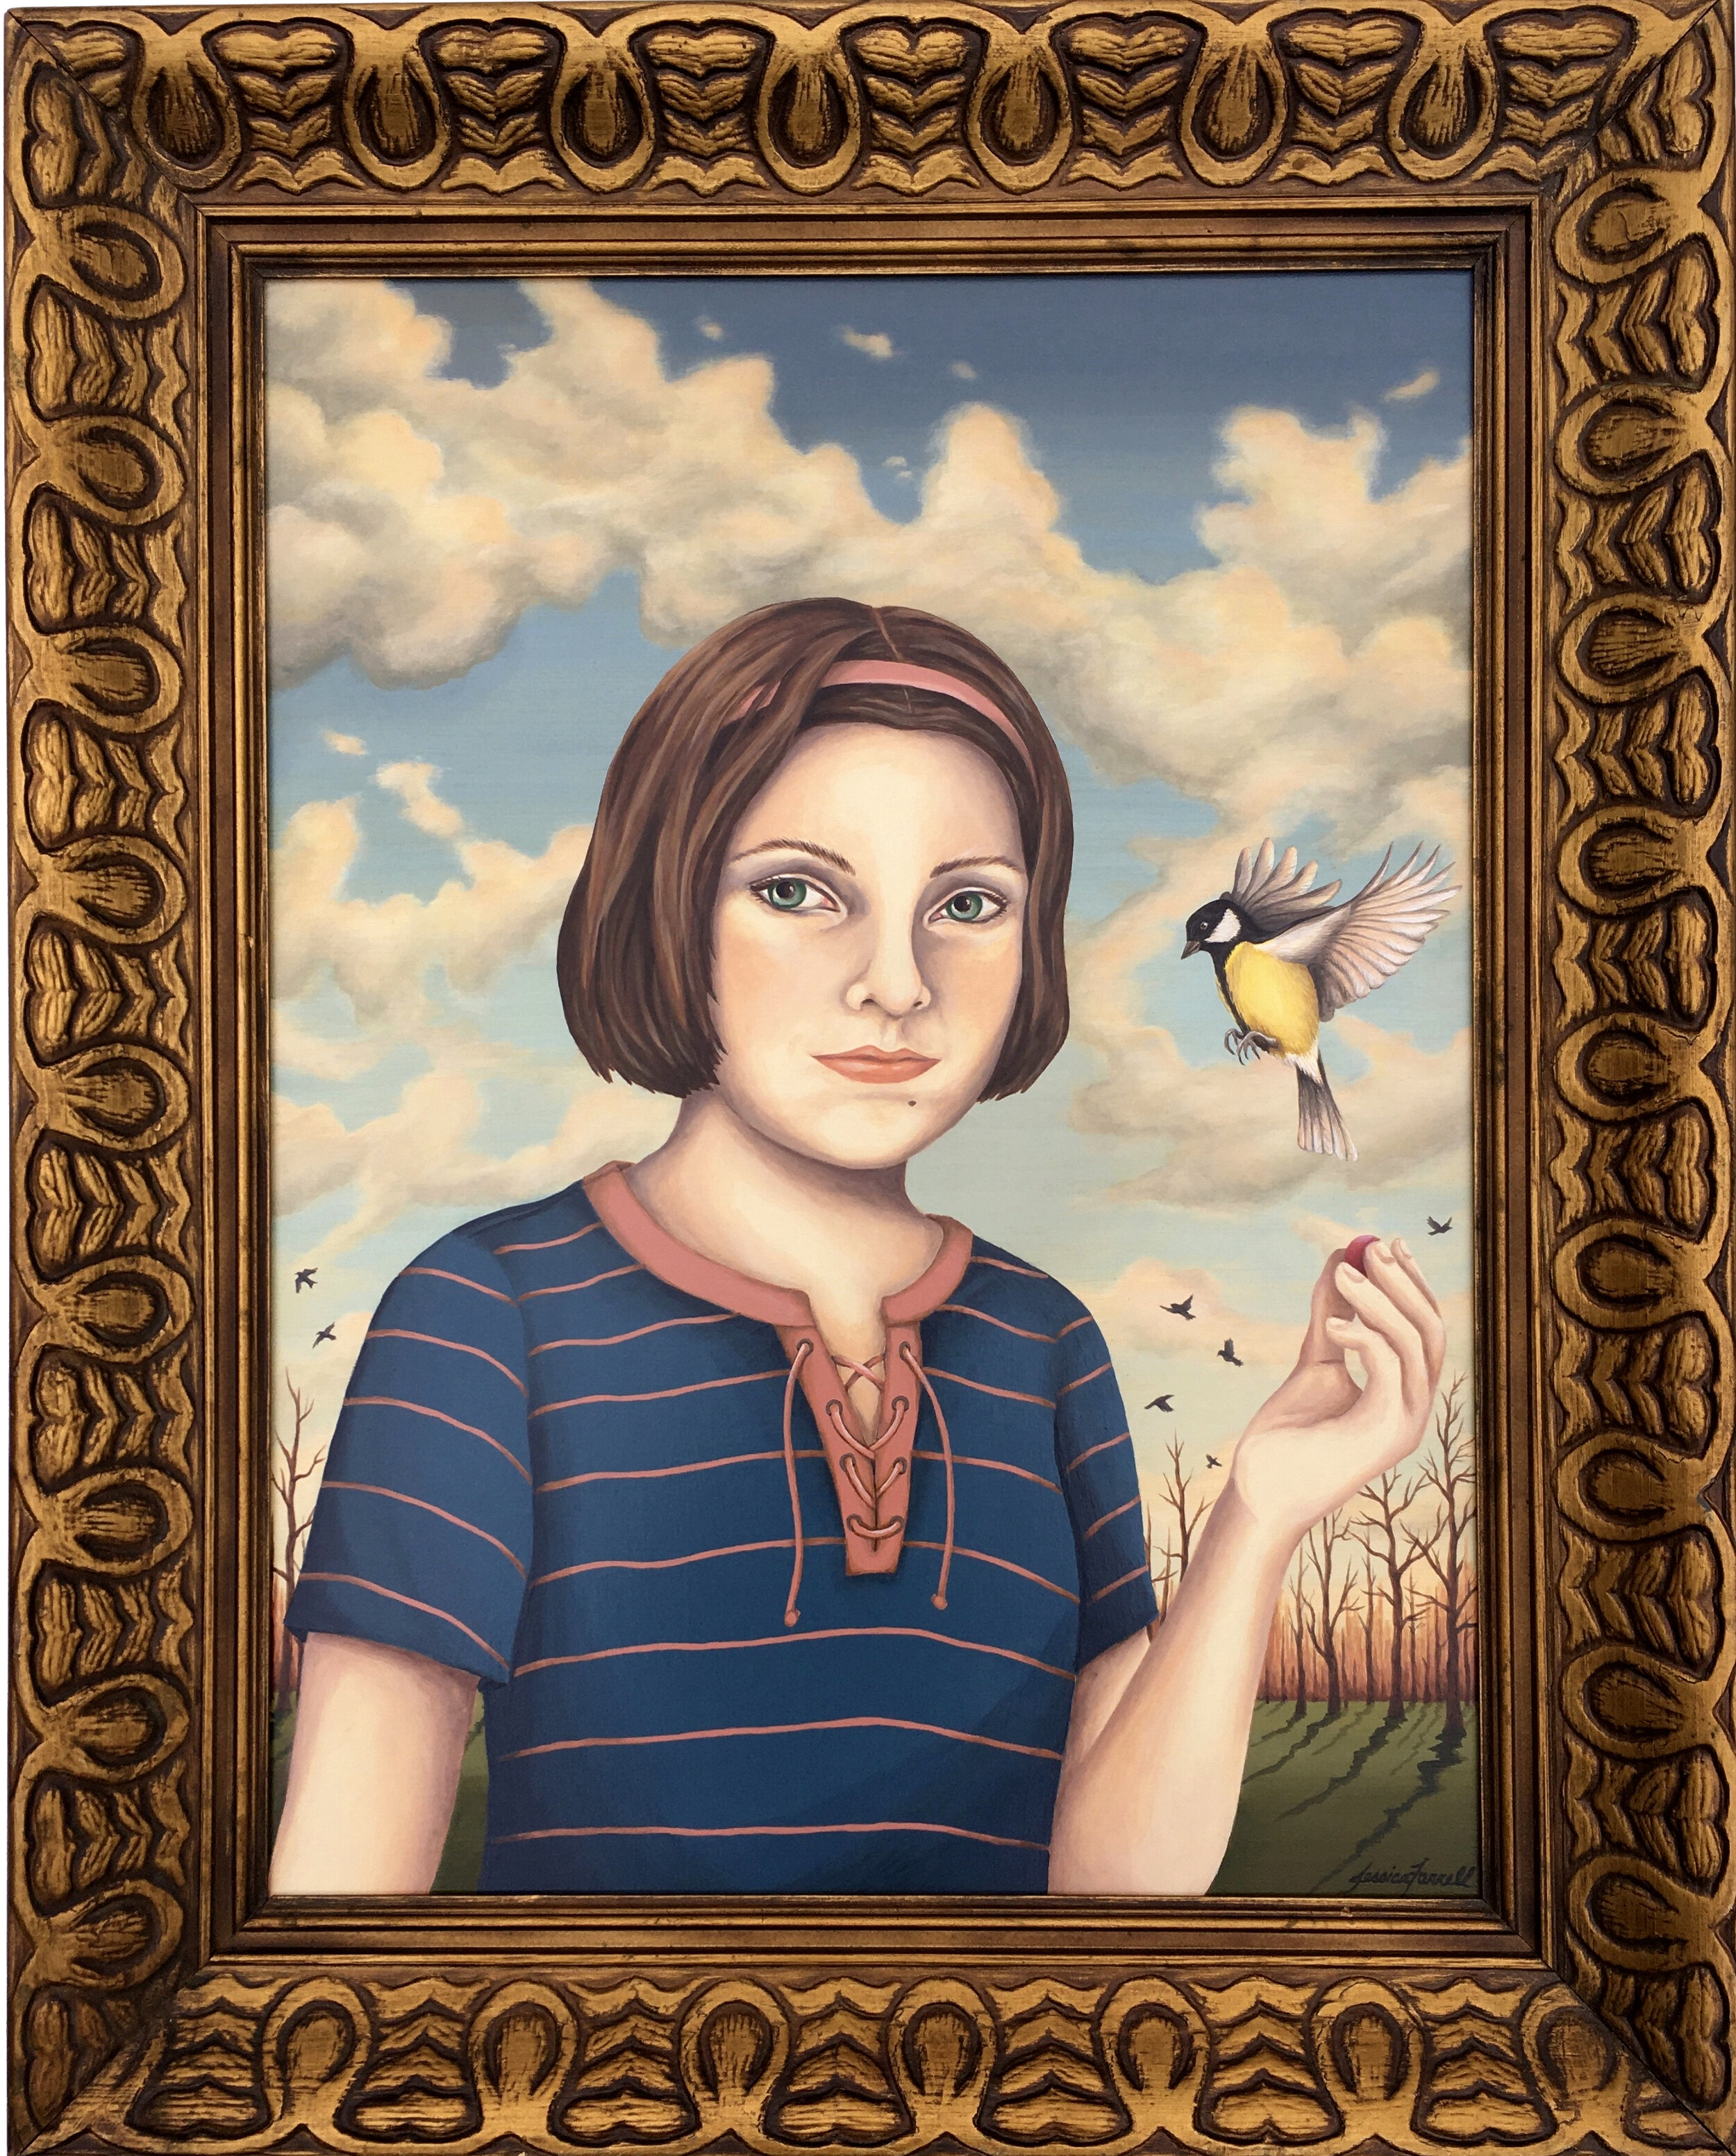   Kate &amp; Yellow Warbler , 2019  Acrylic on wood  24 x 18 inches (unframed)  30 x 24 inches (framed) 